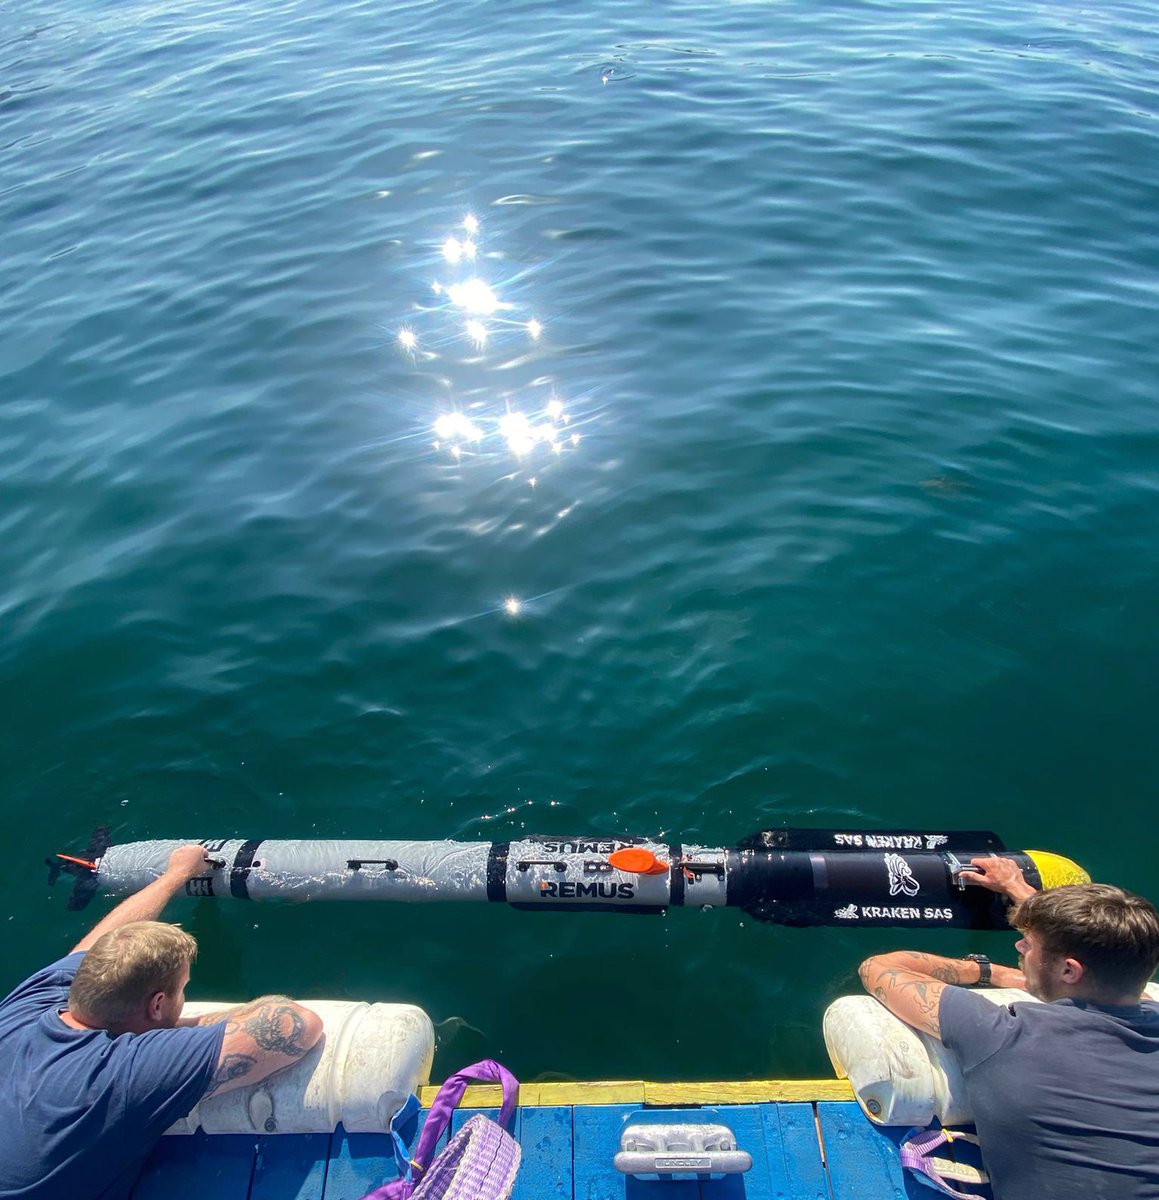 📣Regeneration update: improve Mine Hunting Capabilites🔱 During #Rempus23🇵🇹 our Mine Warfare specialists helped trial new Uncrewed Underwater Vehicles that we may embark. ✅Improve accuracy. ✅Extend range. ✅Speed up the Mine Clearance effort. #WeAreNATO #SmallShipsBigImpact